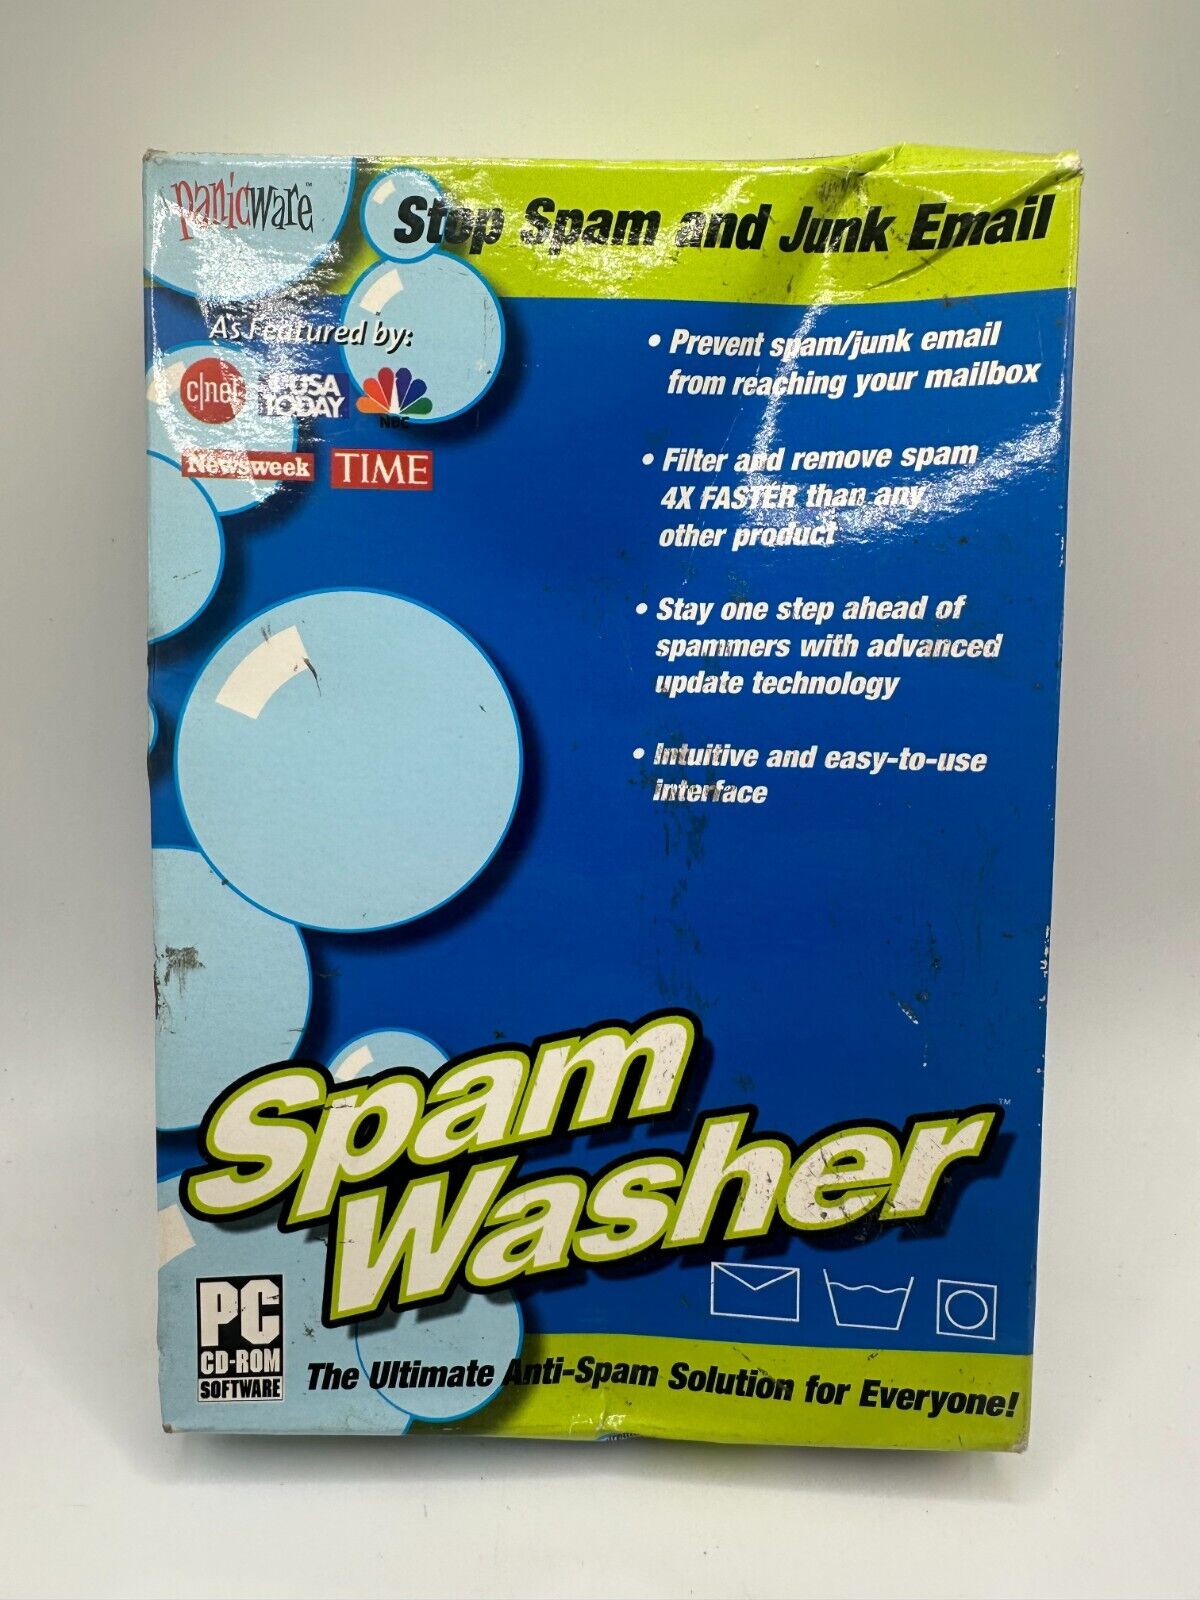 Spam Washer Software for PC